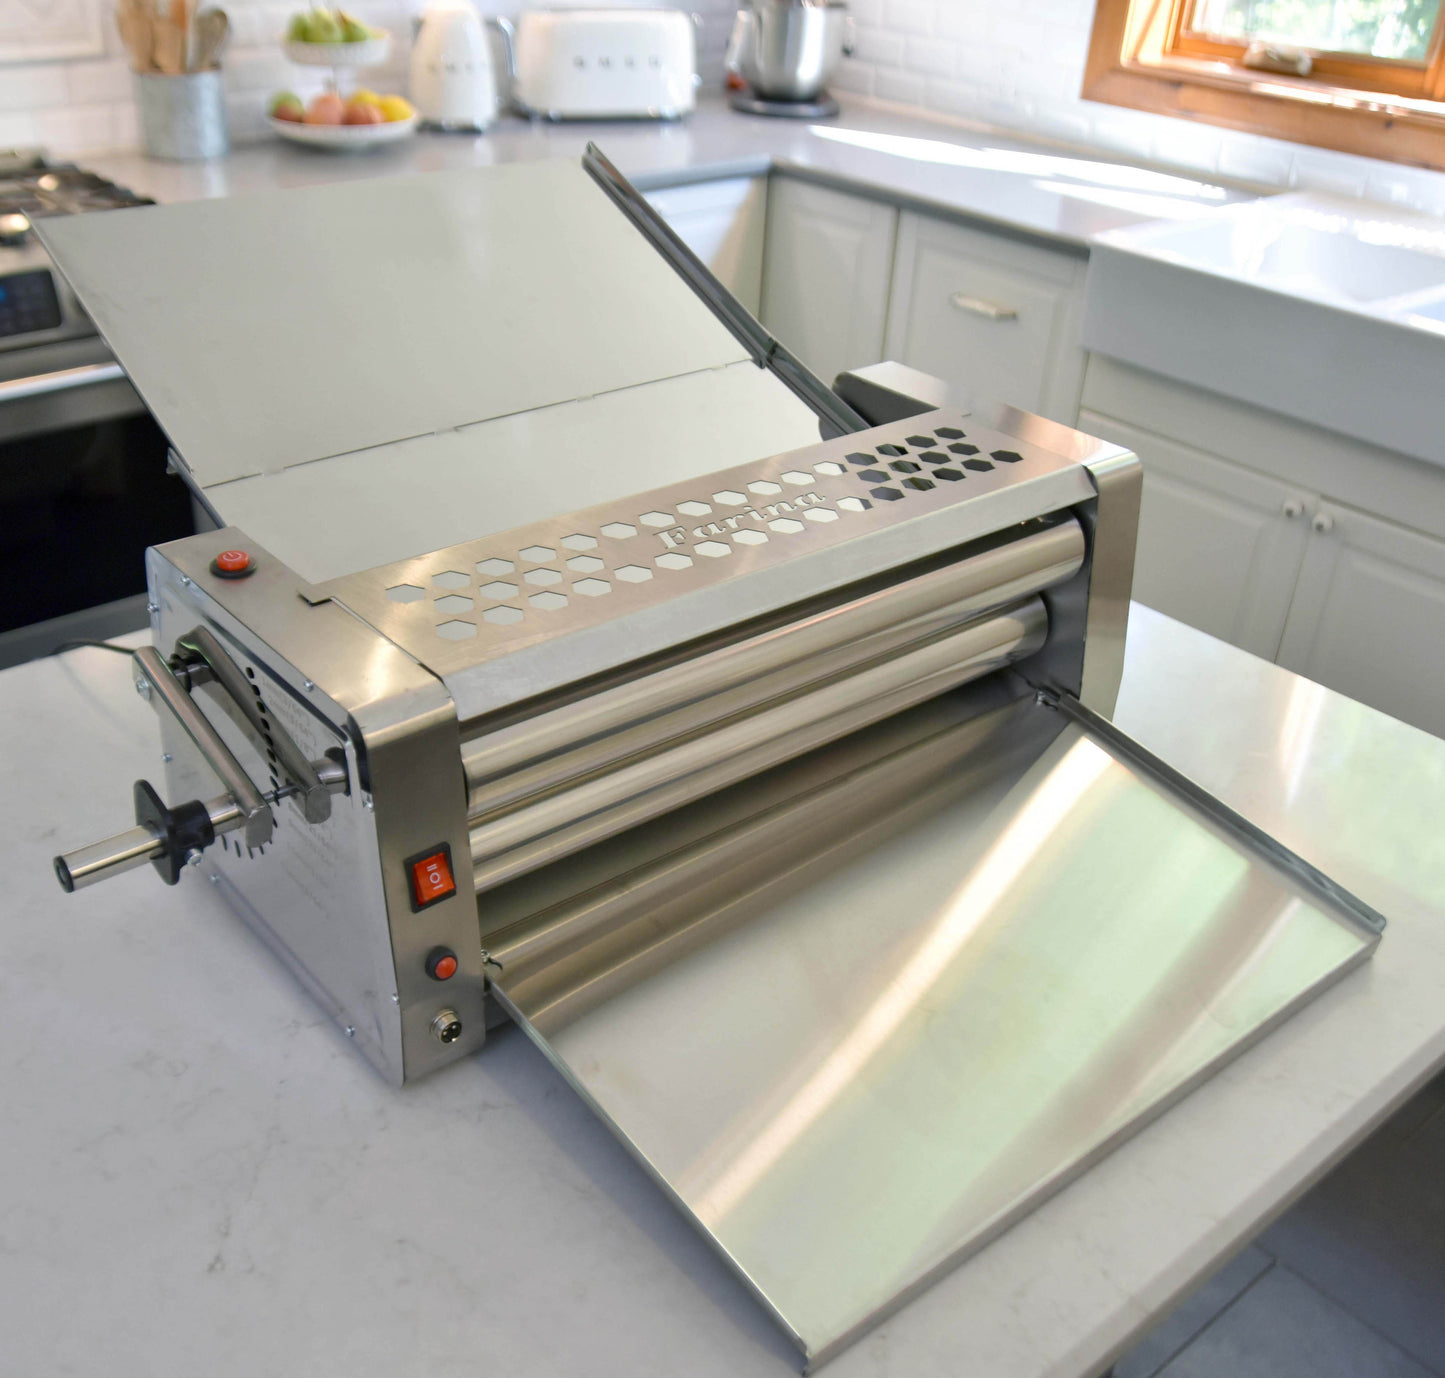 Electric Dough Sheeter for Home Use and Cafe Dough Roller 